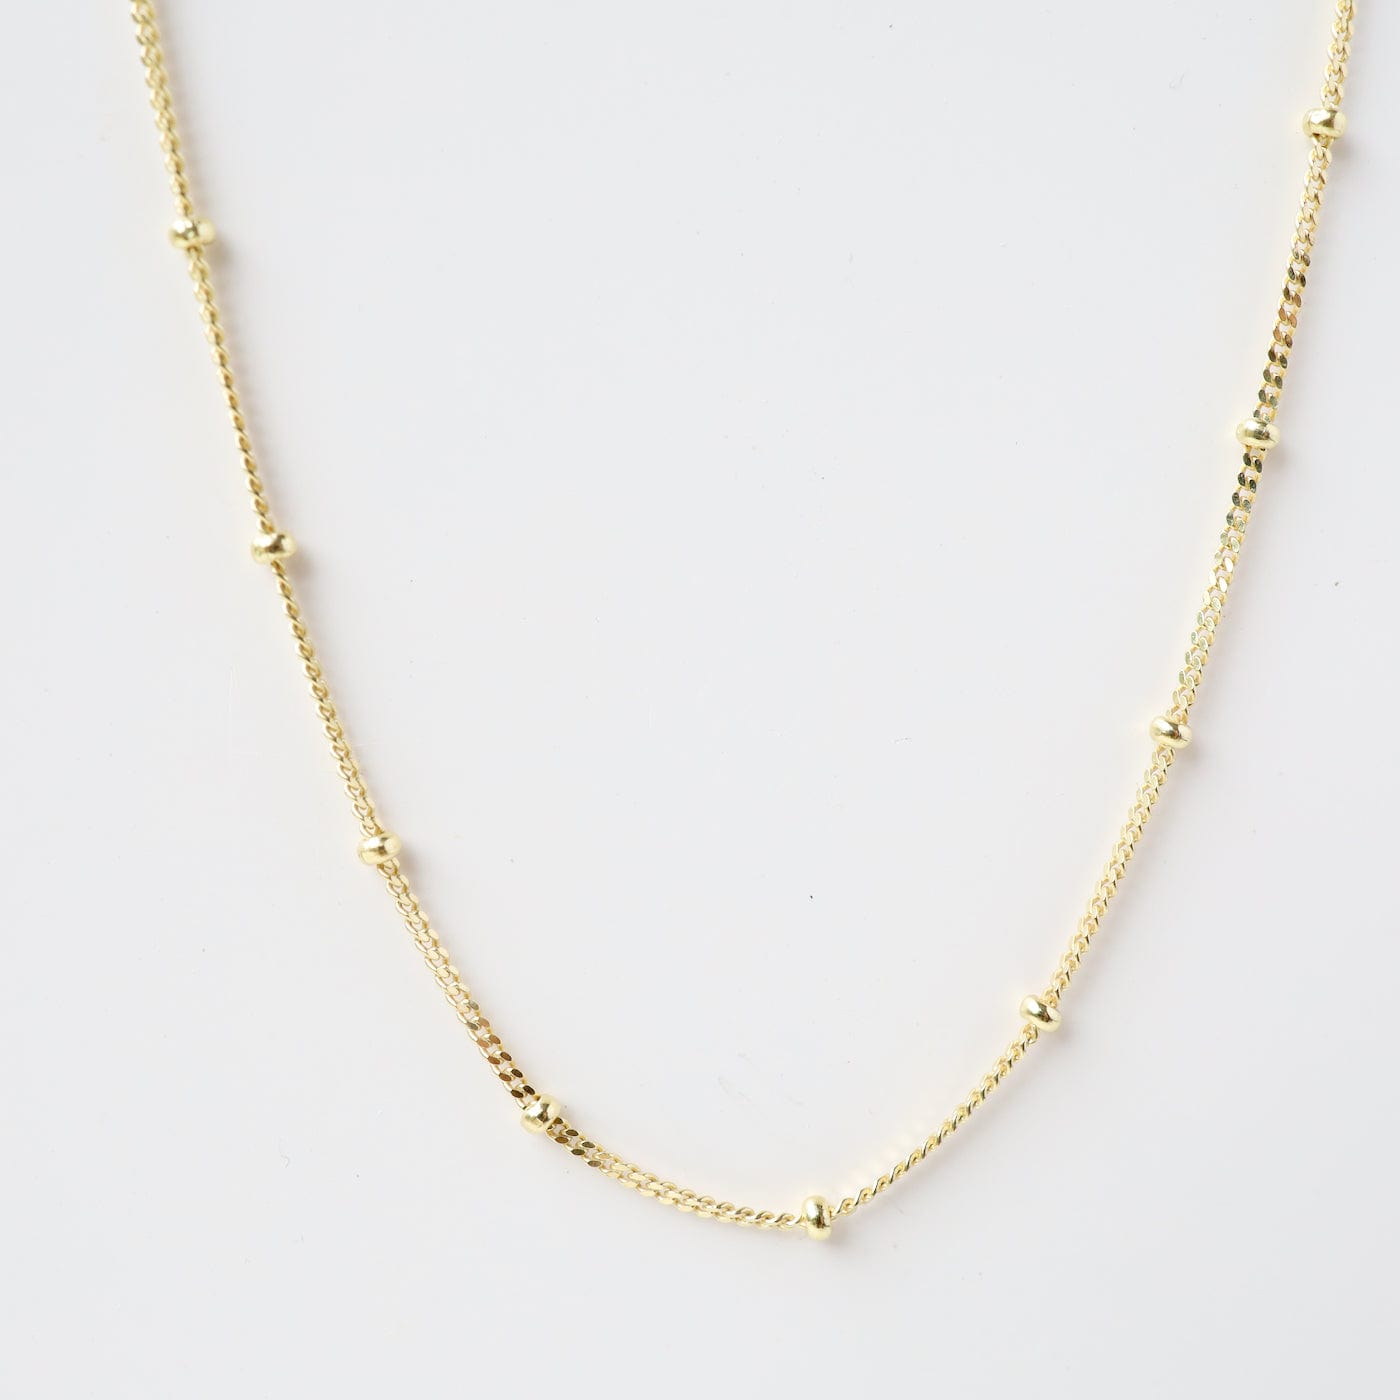 CHN Gold Plated Curb Chain with Bead Stations - 16" to 18"